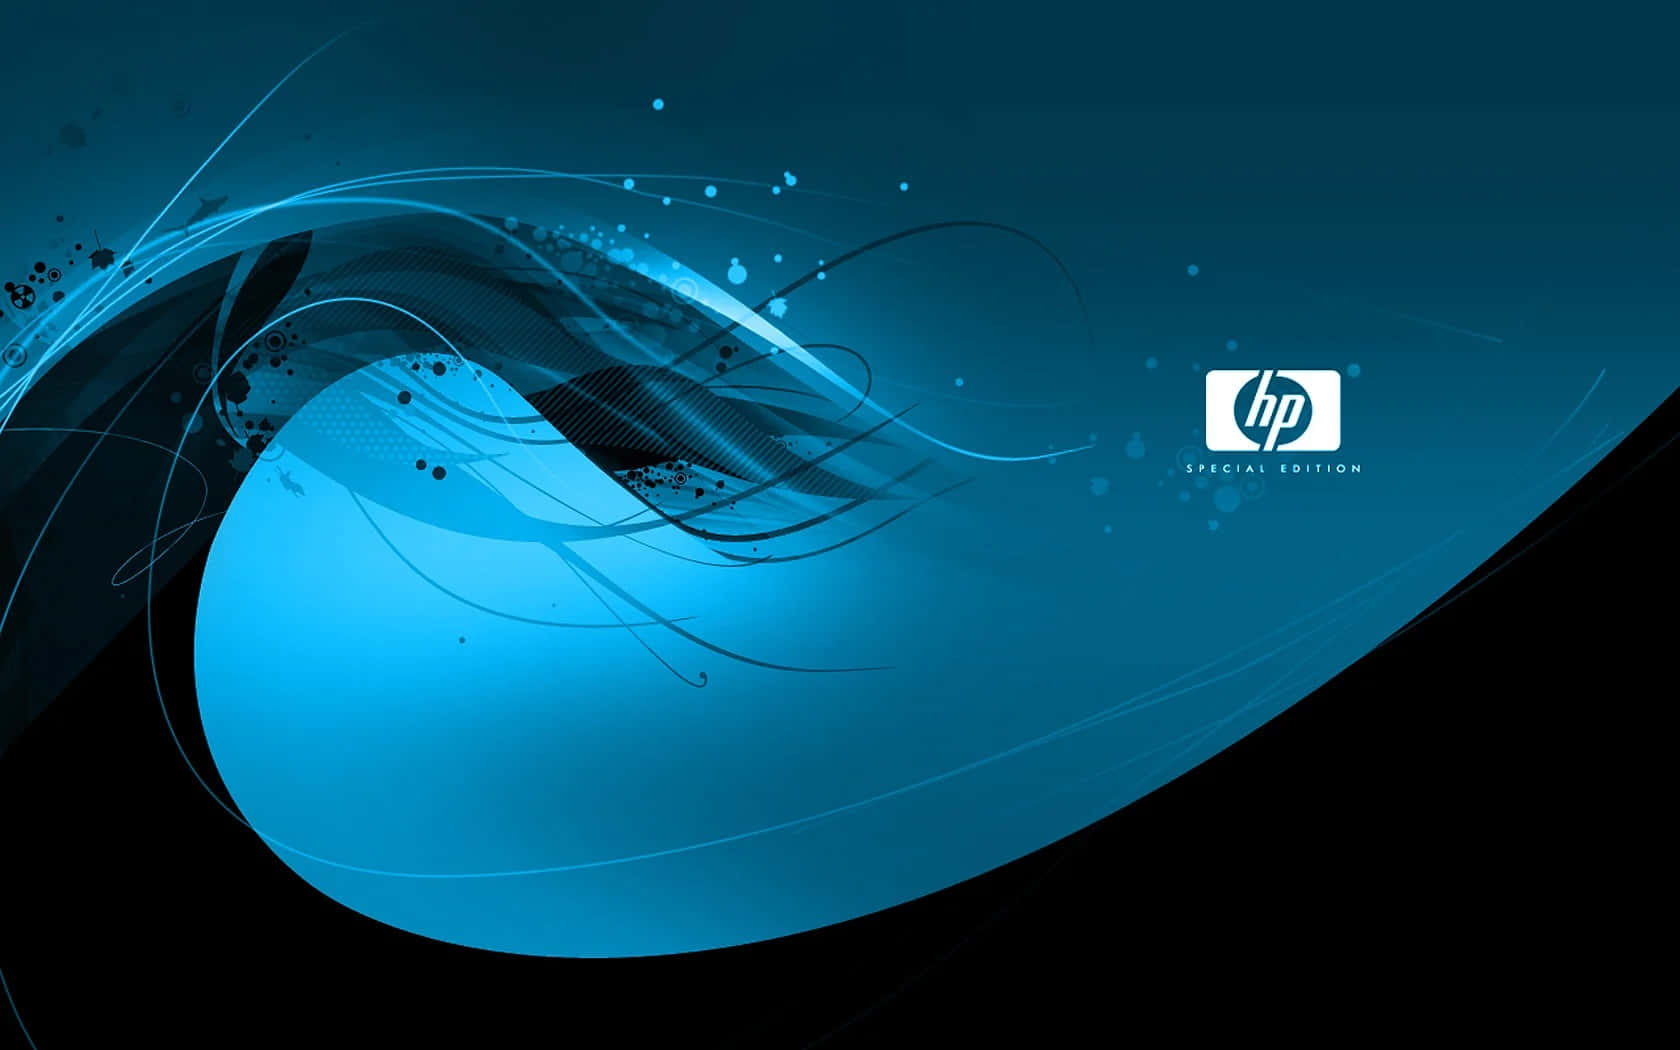 Achieve more with the power of HP: